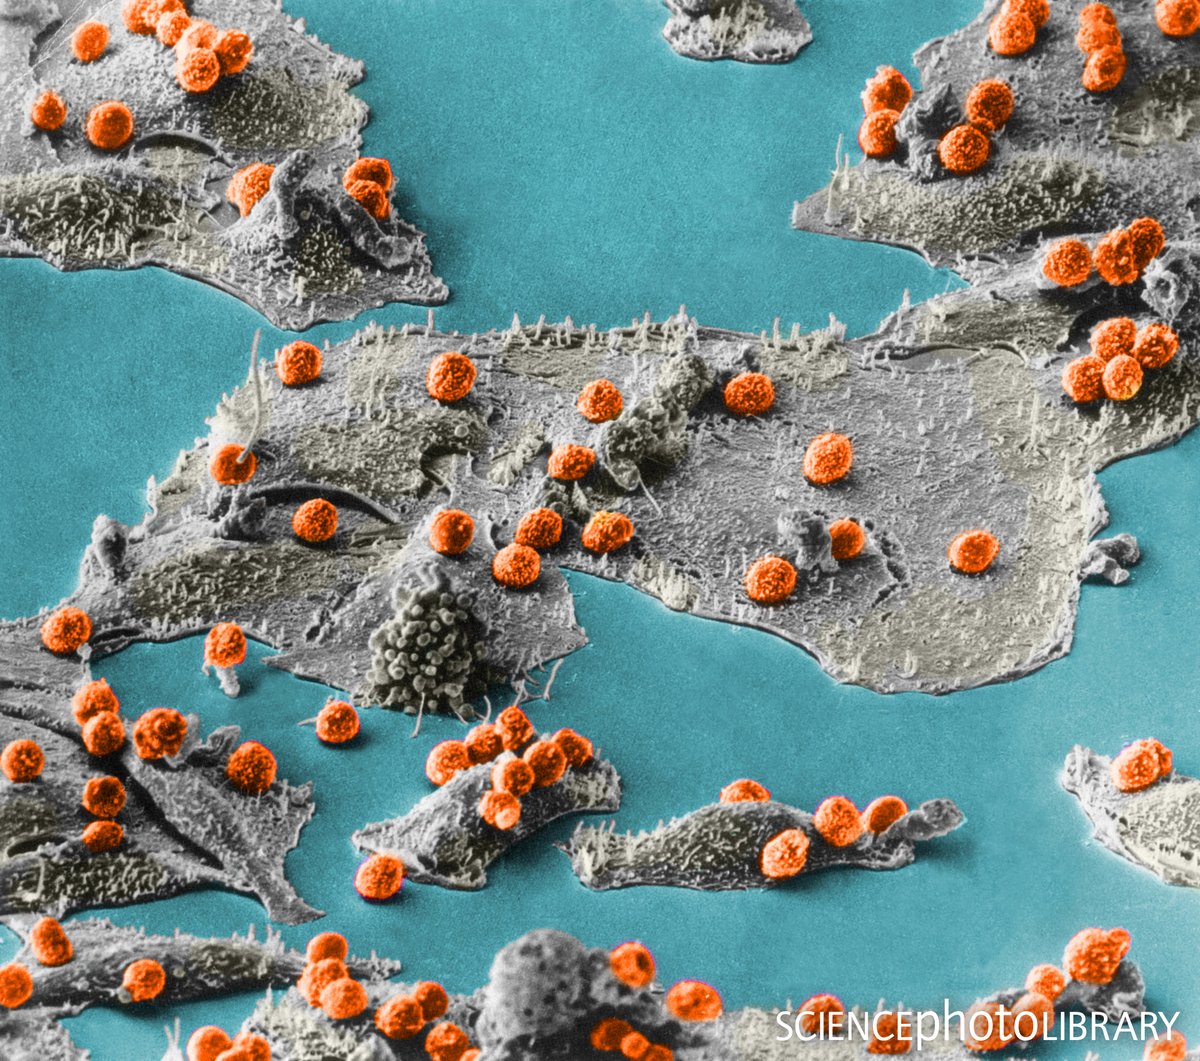 This SEM shows a battlefield, with immune cells (small sphericals, red) attacking cancer cells (larger bodies, grey). 

Credit: Science Source / Science Photo Library
bit.ly/2RFepT8
#cancer #immunecells #whitebloodcells #sciart